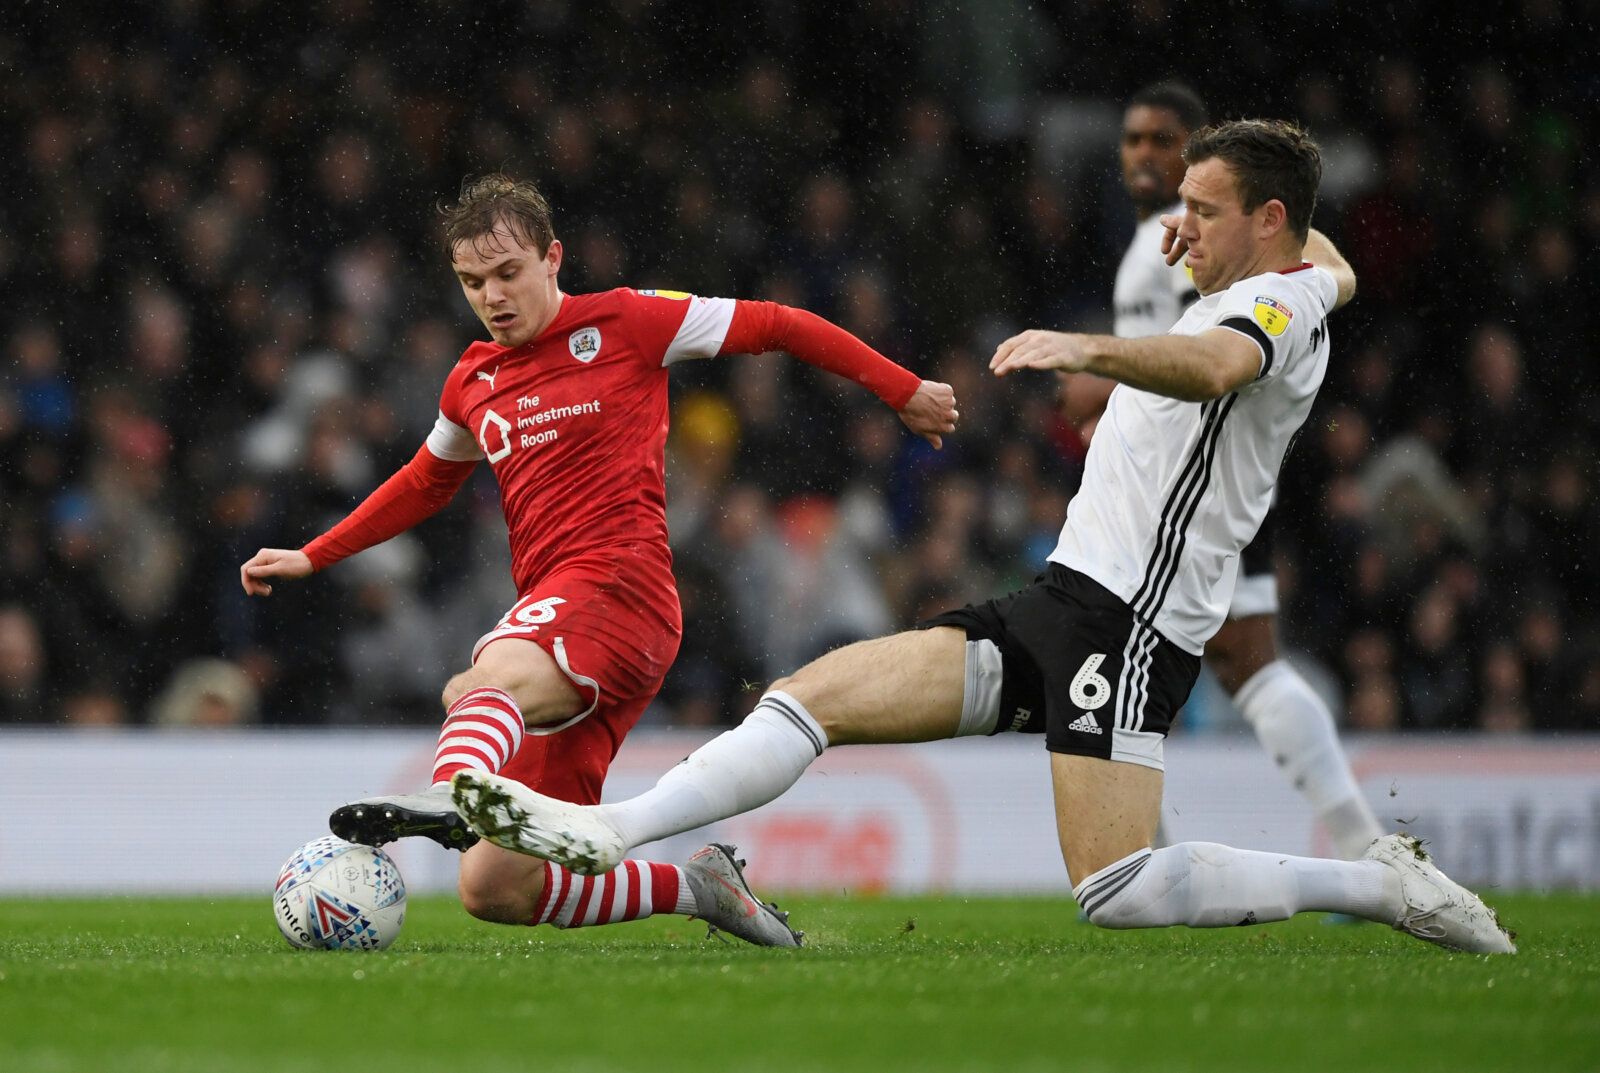 Soccer Football - Championship - Fulham v Barnsley - Craven Cottage, London, Britain - February 15, 2020  Fulham's Kevin McDonald in action with Barnsley's Luke Thomas  Action Images/Tony O'Brien  EDITORIAL USE ONLY. No use with unauthorized audio, video, data, fixture lists, club/league logos or "live" services. Online in-match use limited to 75 images, no video emulation. No use in betting, games or single club/league/player publications.  Please contact your account representative for further